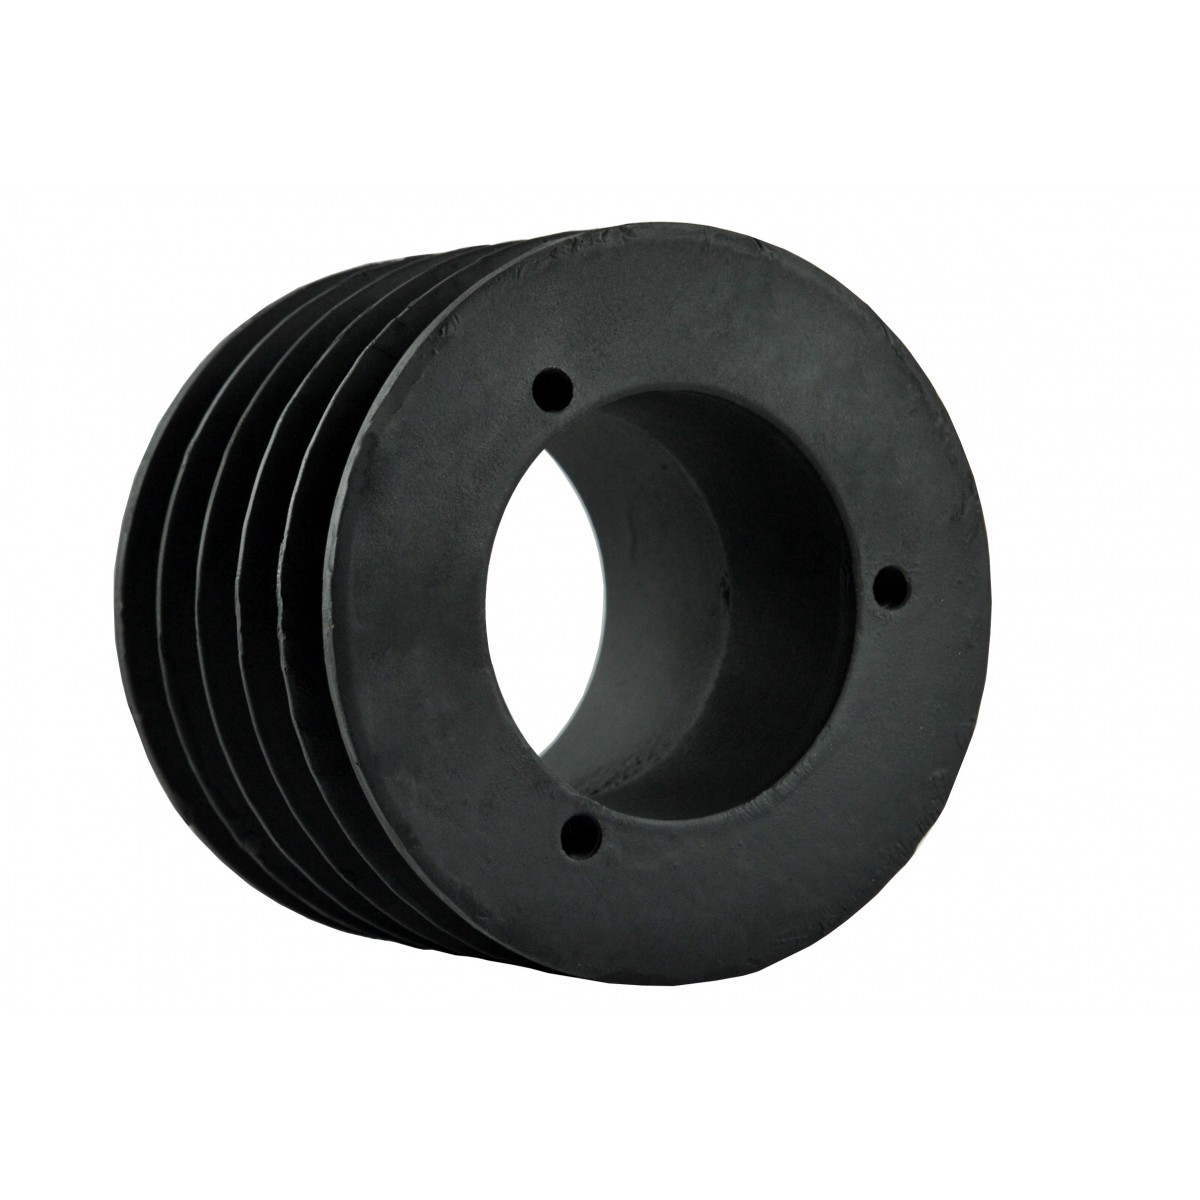 Pulley 126 x 70 x 90 mm for 5 belts A14, B14 for WC8 chipper